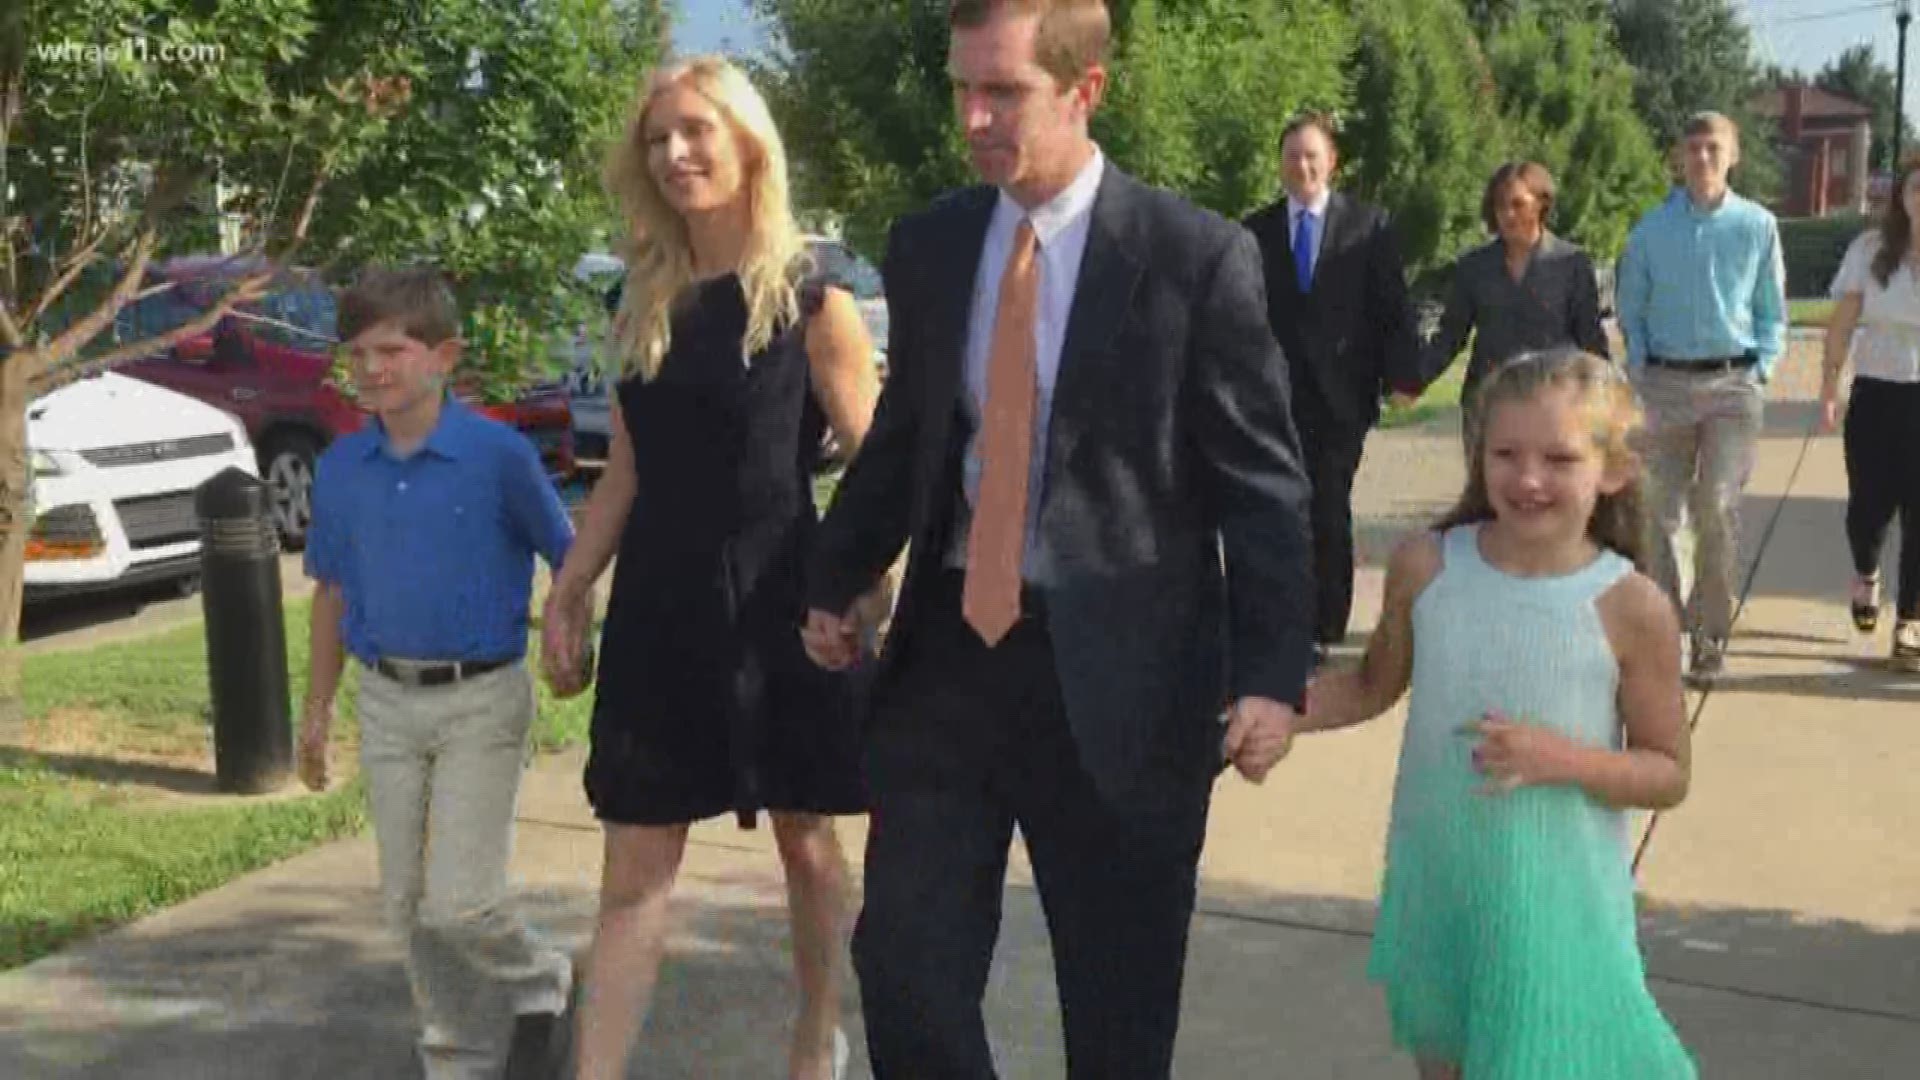 Kentucky's Democrat Attorney General Andy Beshear is the first to officially jump into the race for governor in 2019.